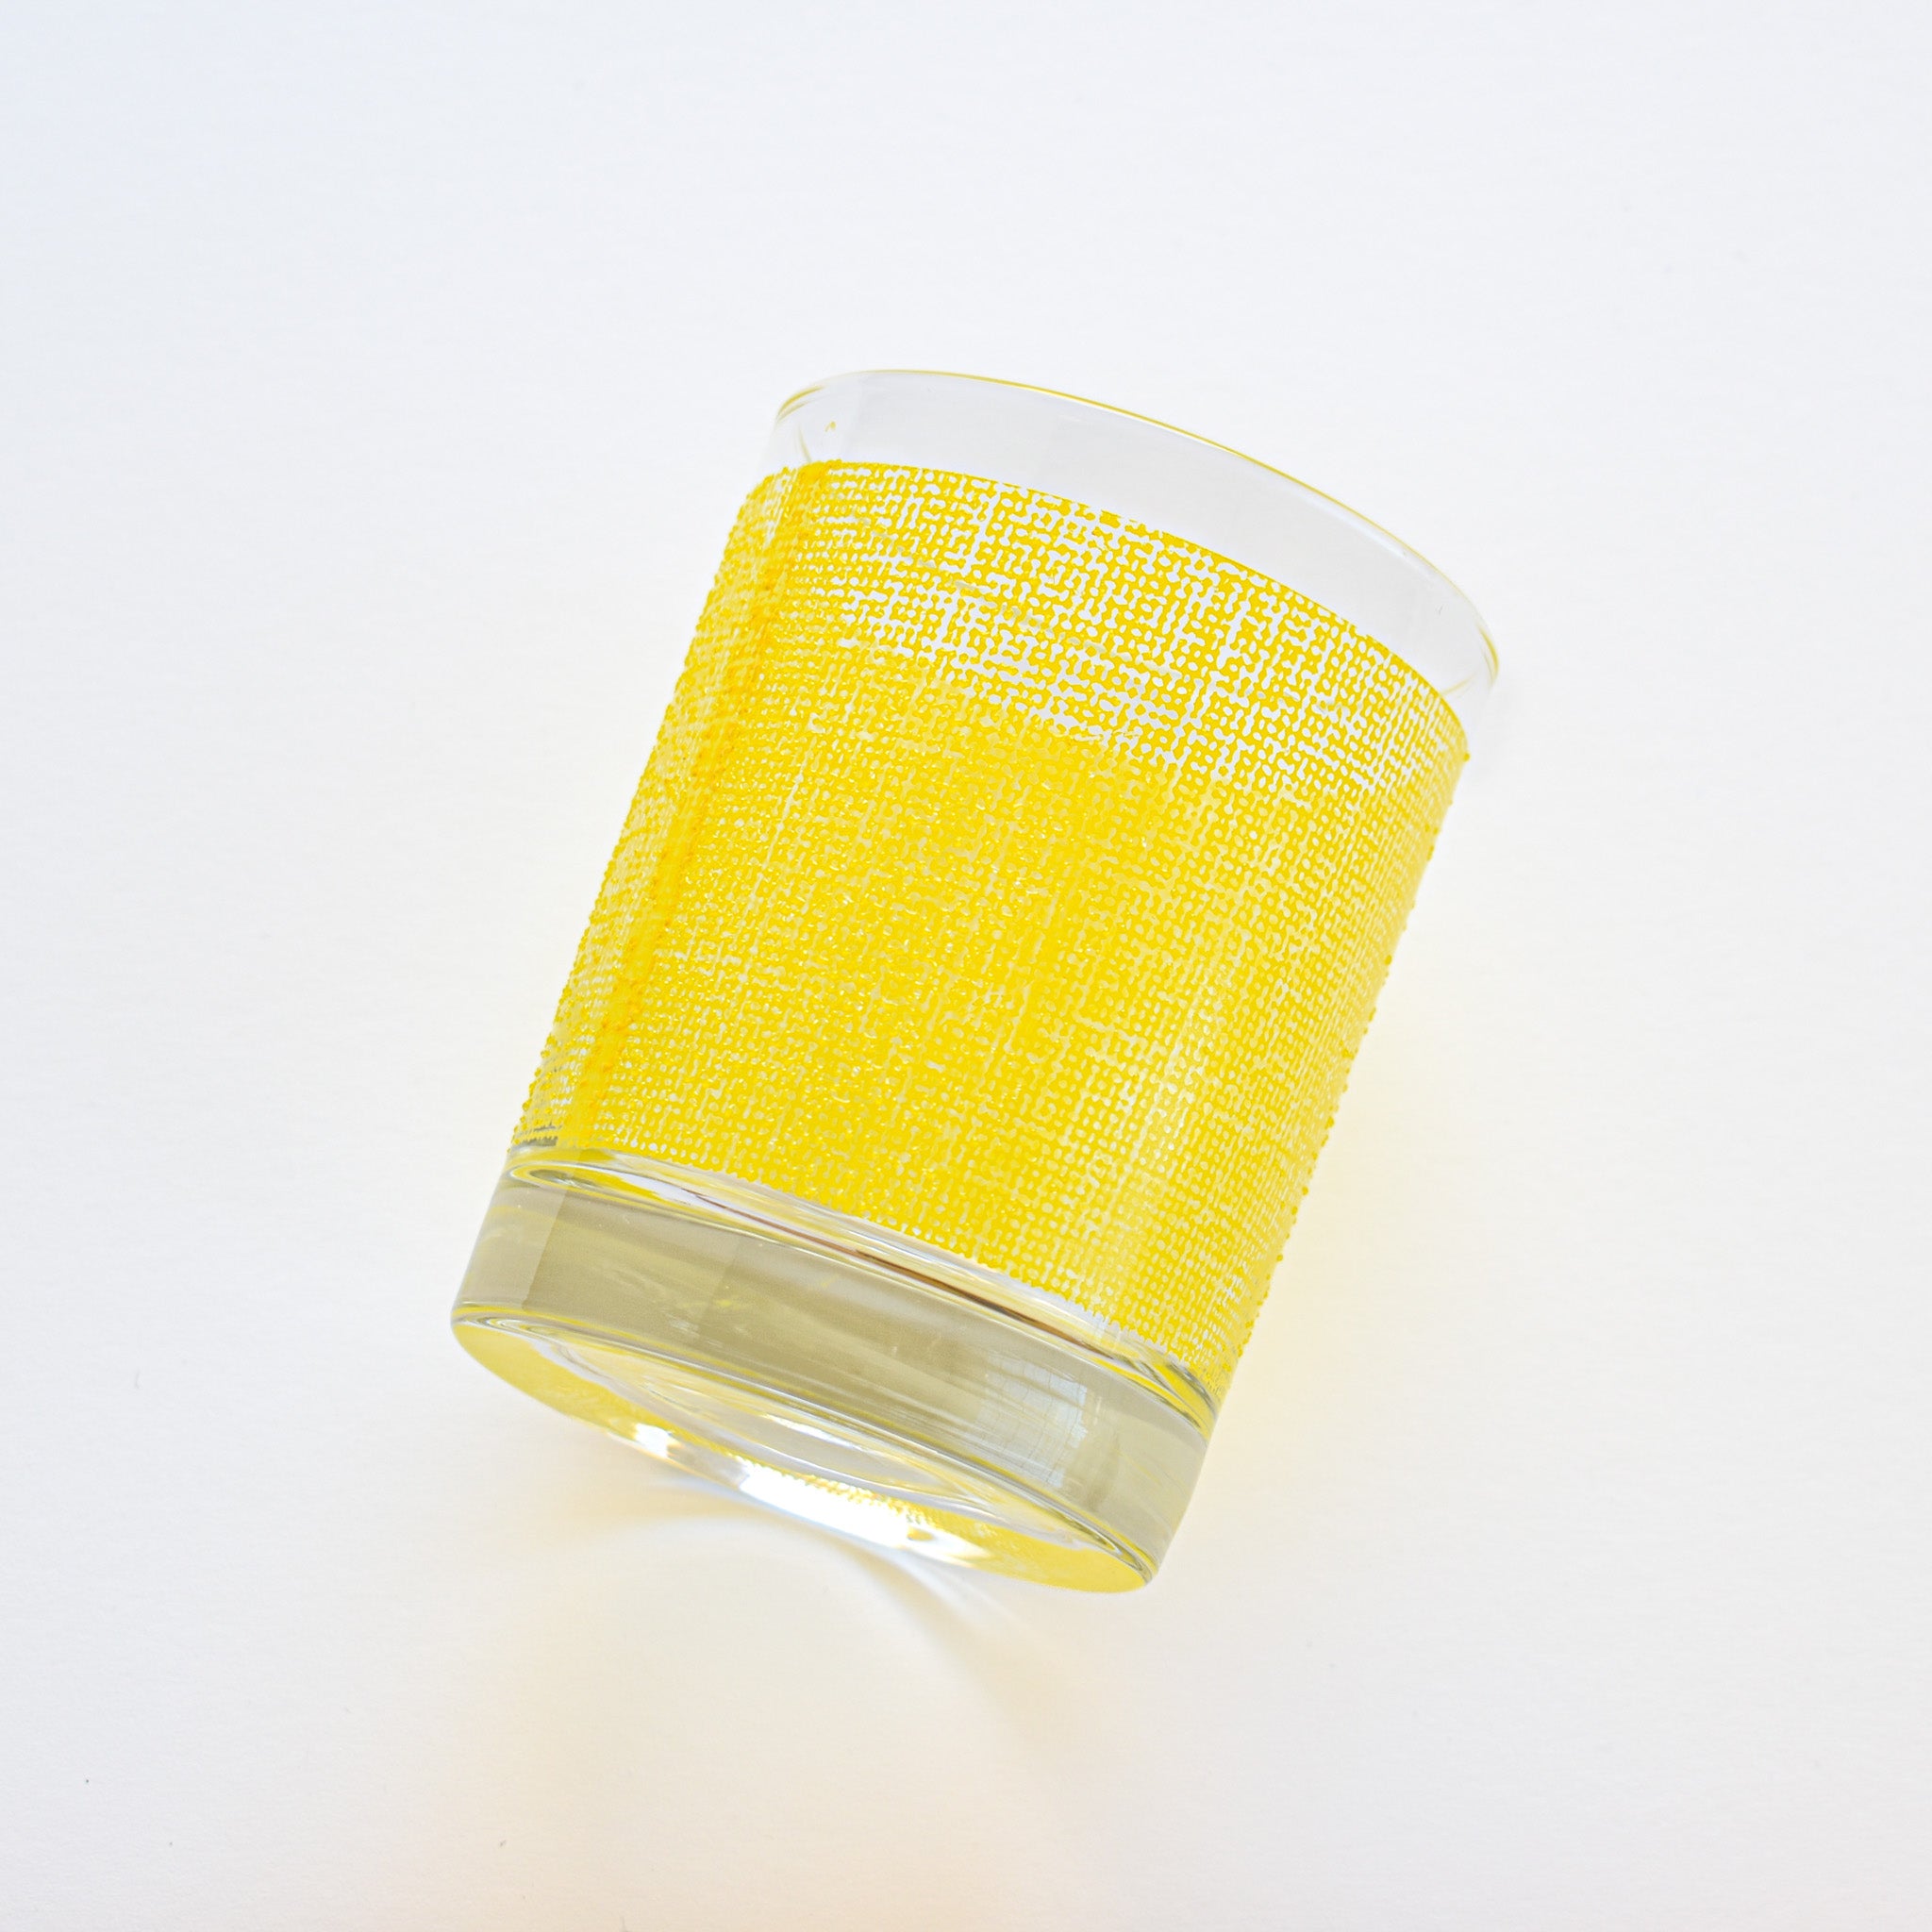 Canary Cocktail Glasses